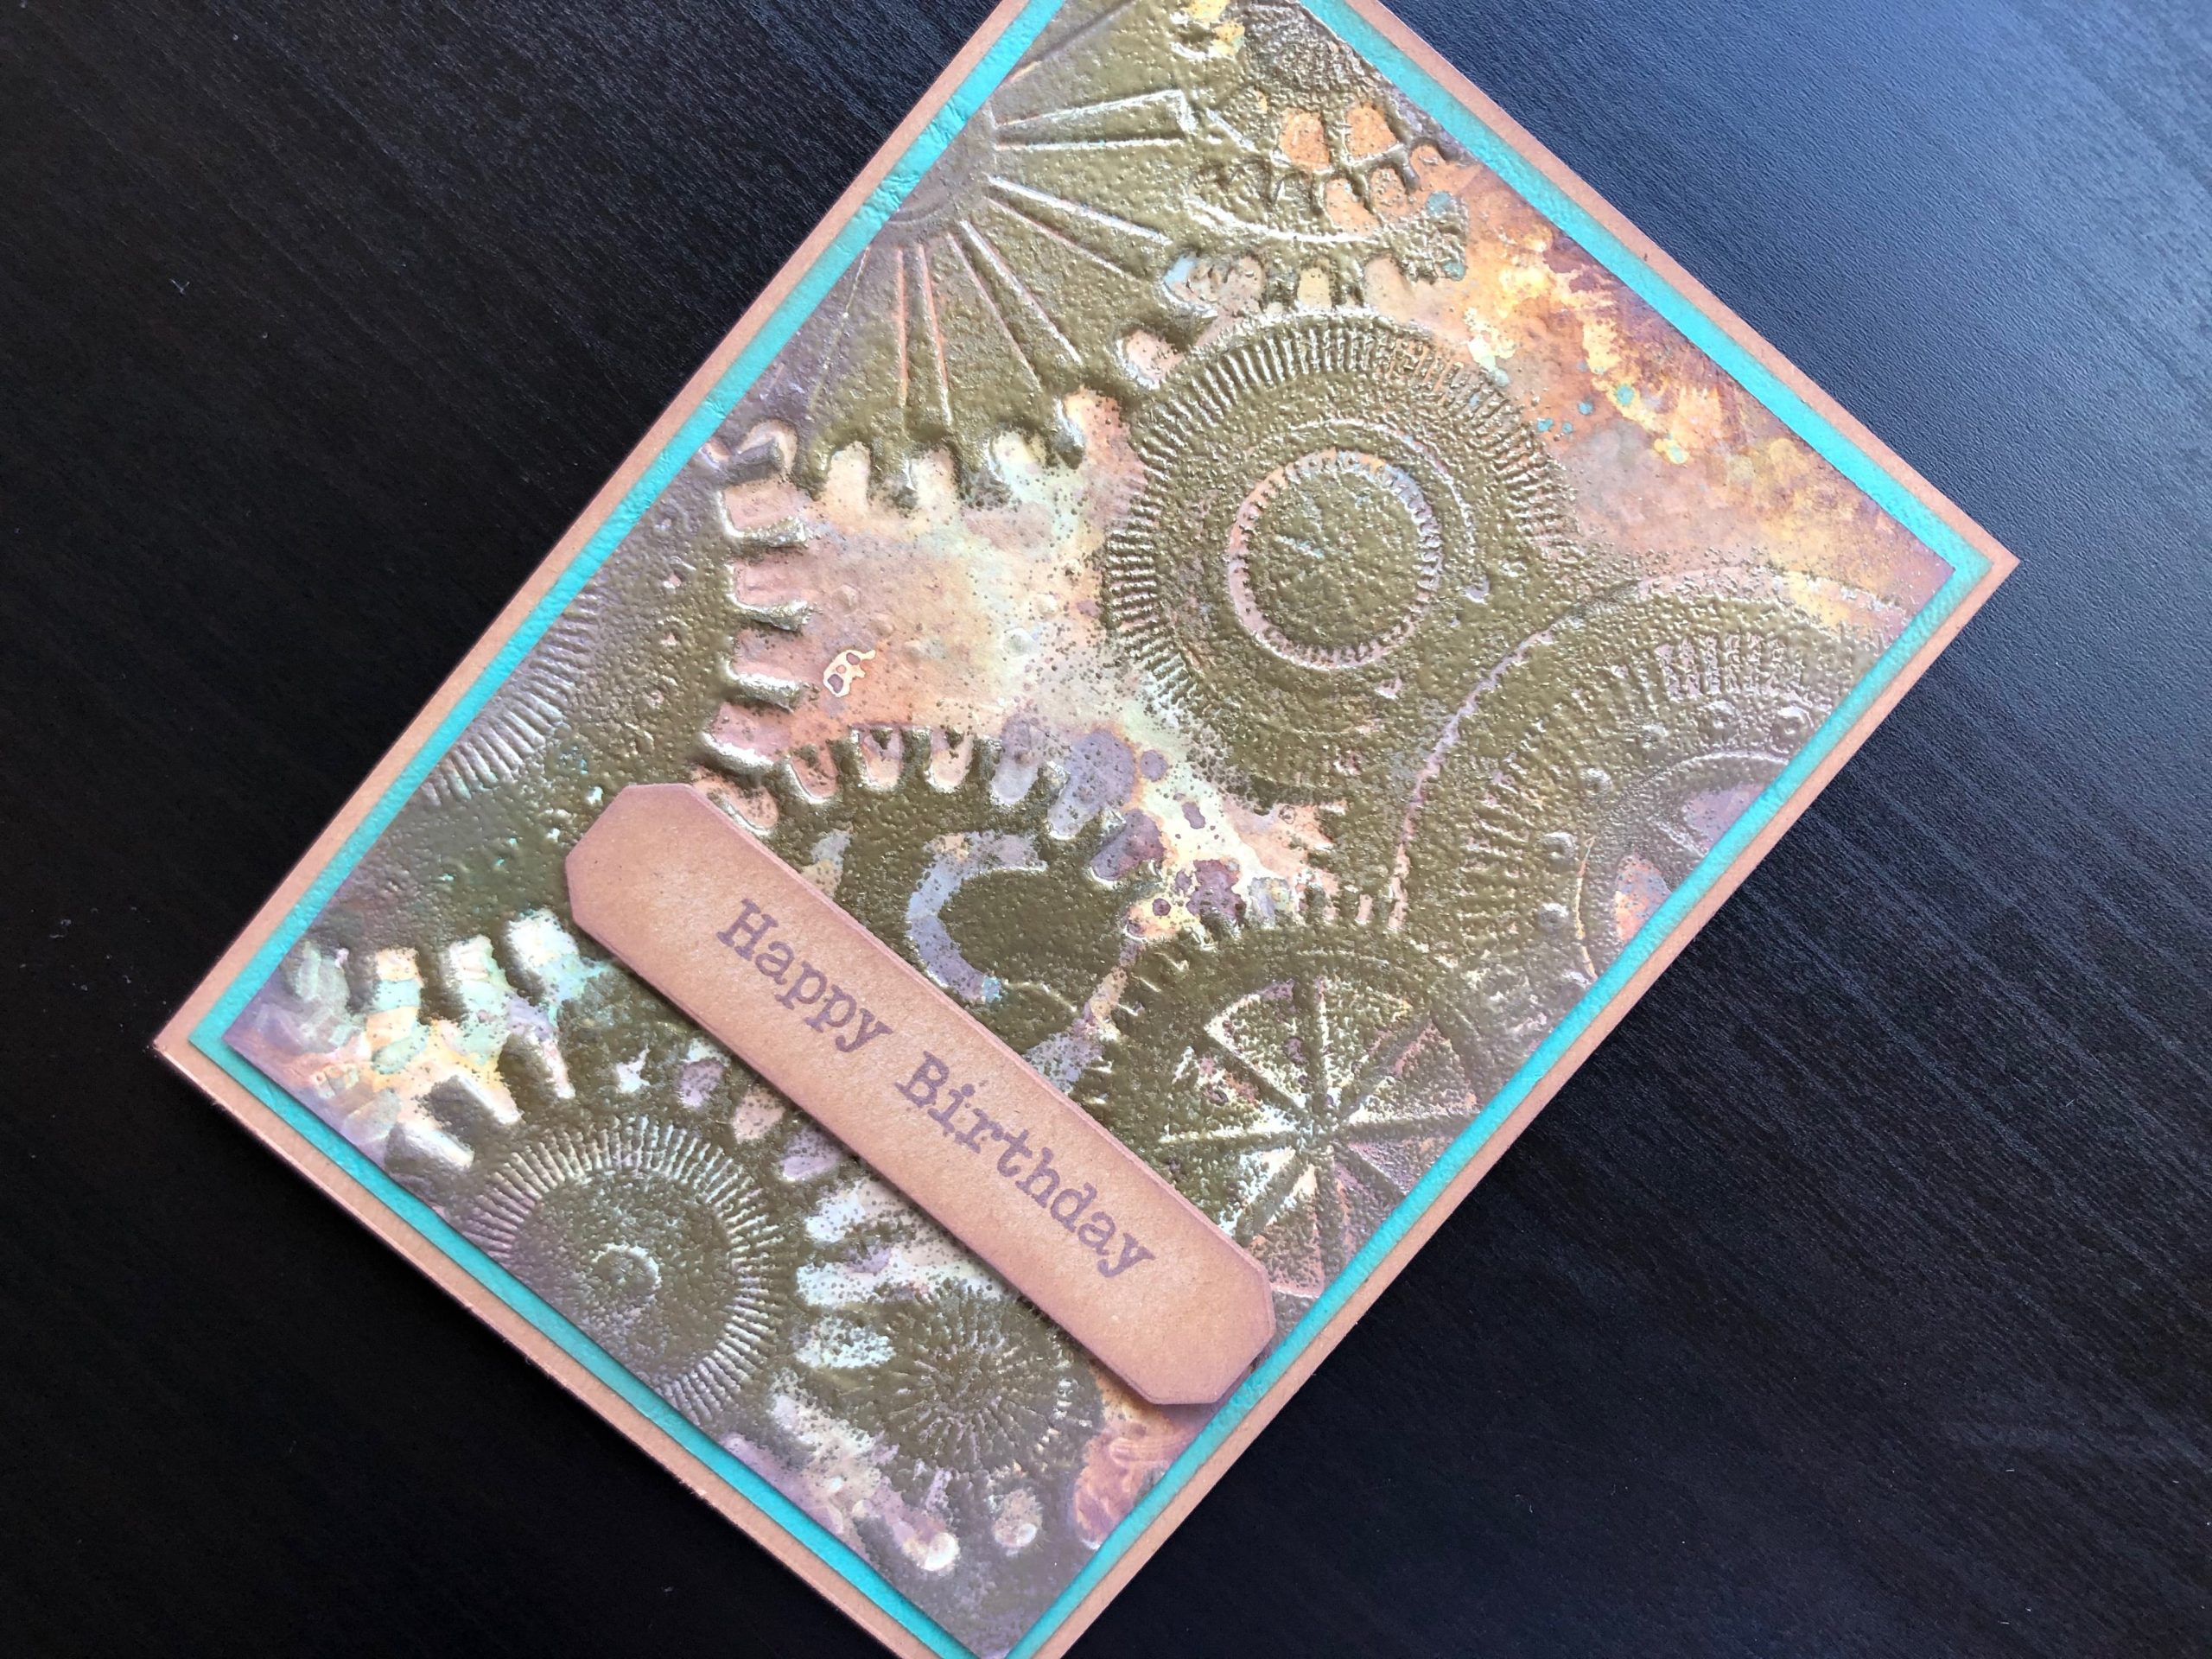 Hand made birthday card with distress oxide background and double embossed cogs